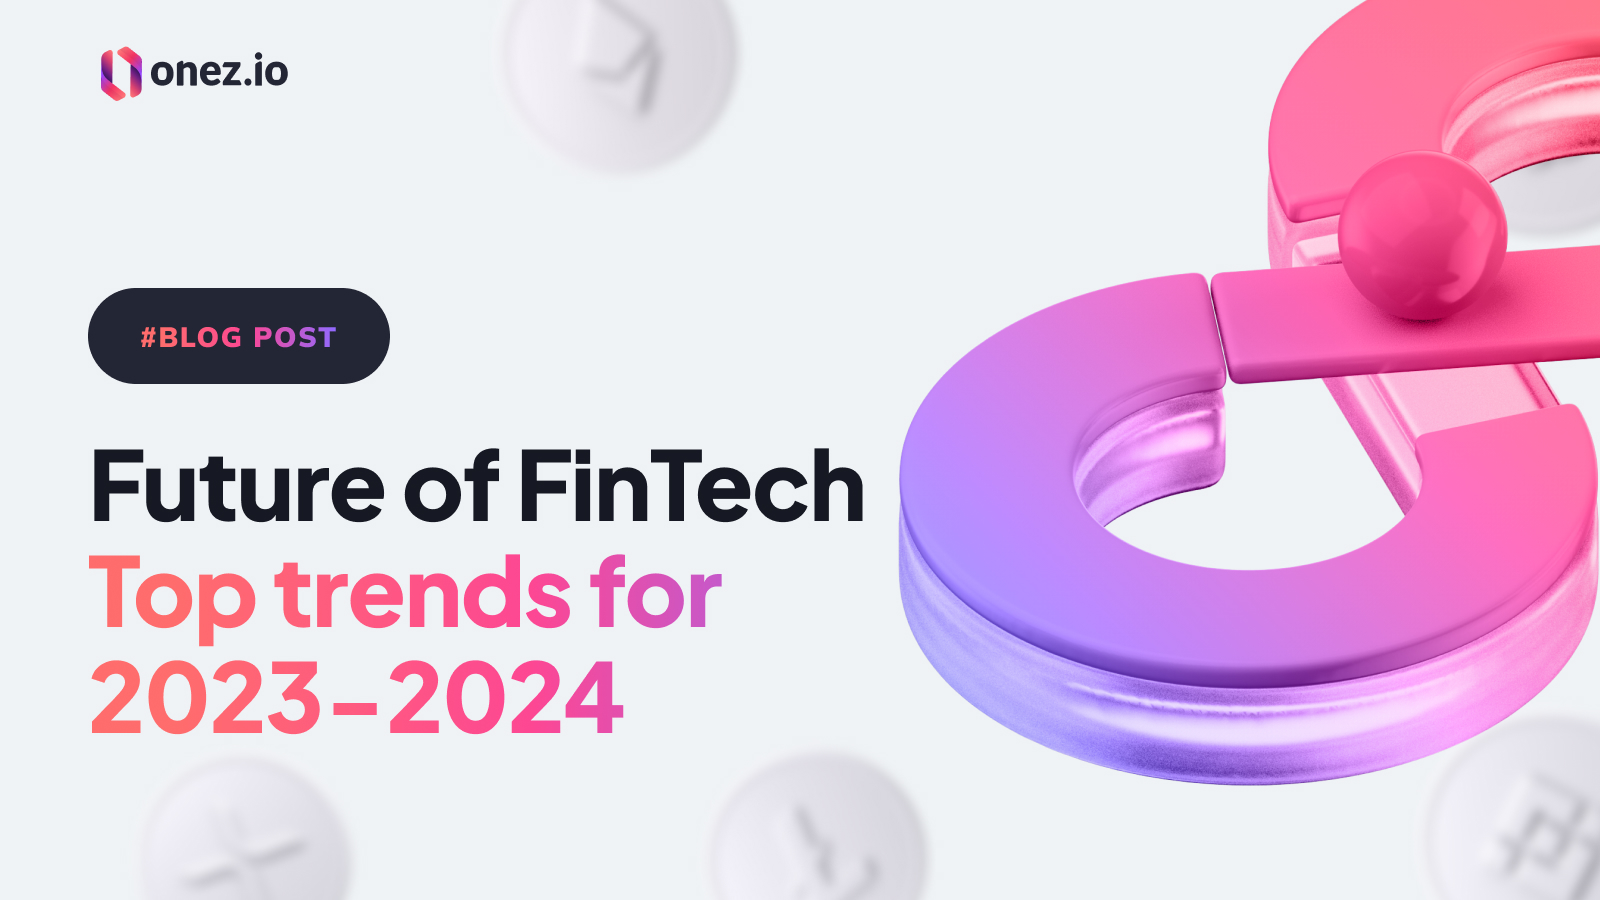 Explore the top FinTech trends for 2023-2024 in our comprehensive guide. Discover how NeoBanks, white label crypto wallets, AI, and blockchain are transforming finance, with insights into solutions like the Onez White Label Crypto Wallet.